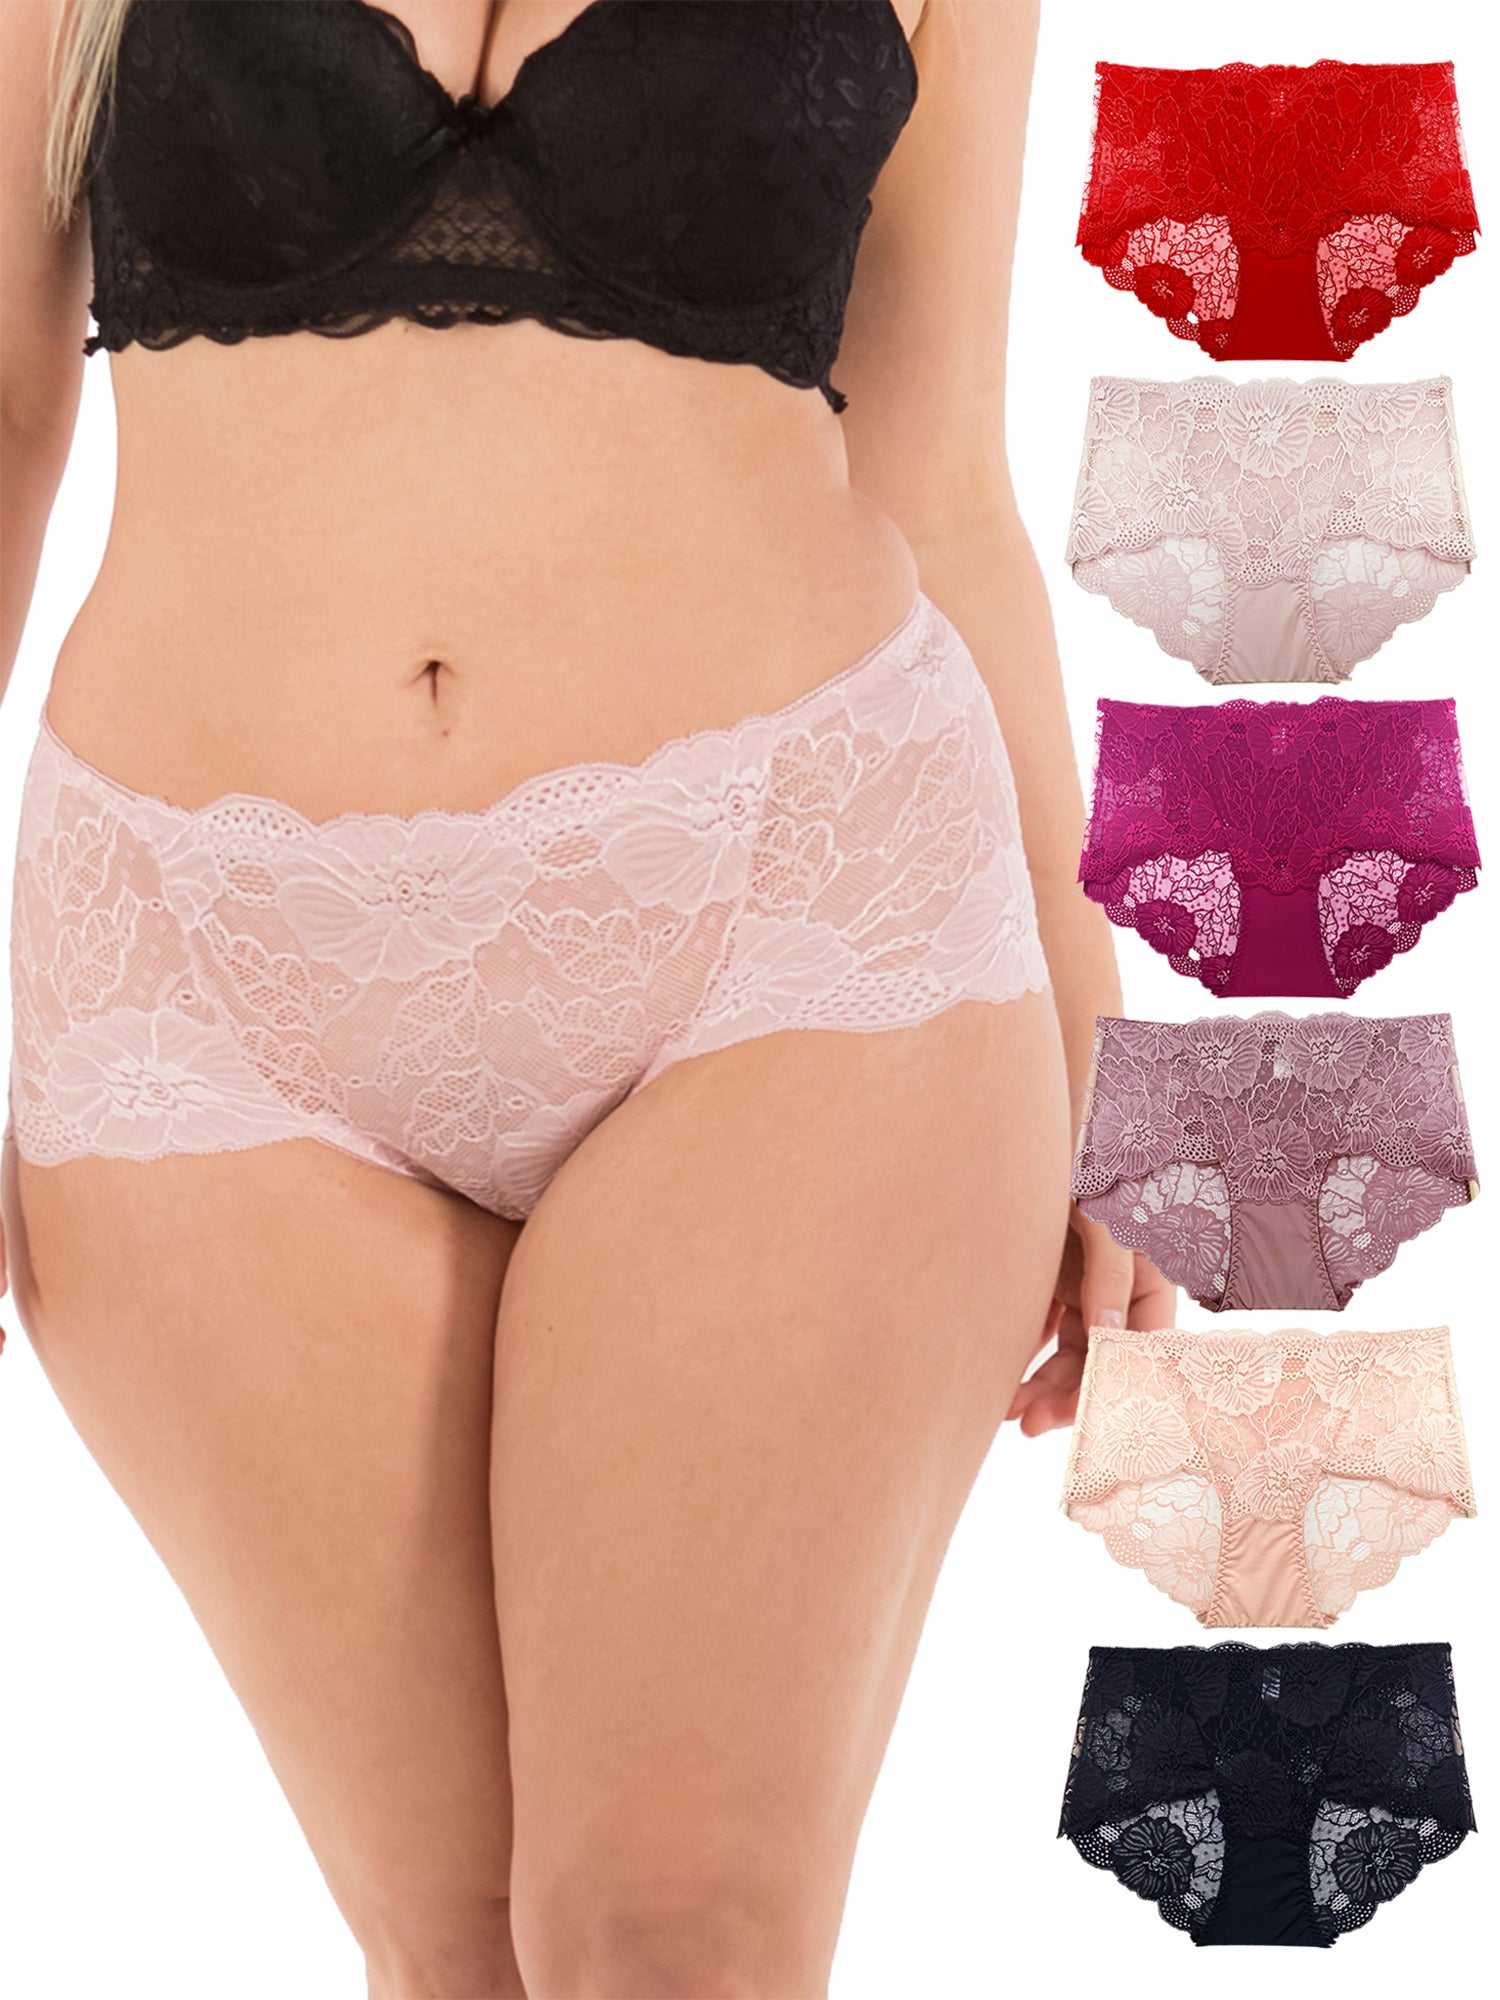 B2BODY Womens Panties Lace Boy Shorts Underwear Small to Plus Size 4 P –  B2BODY - Formerly Barbra Lingerie